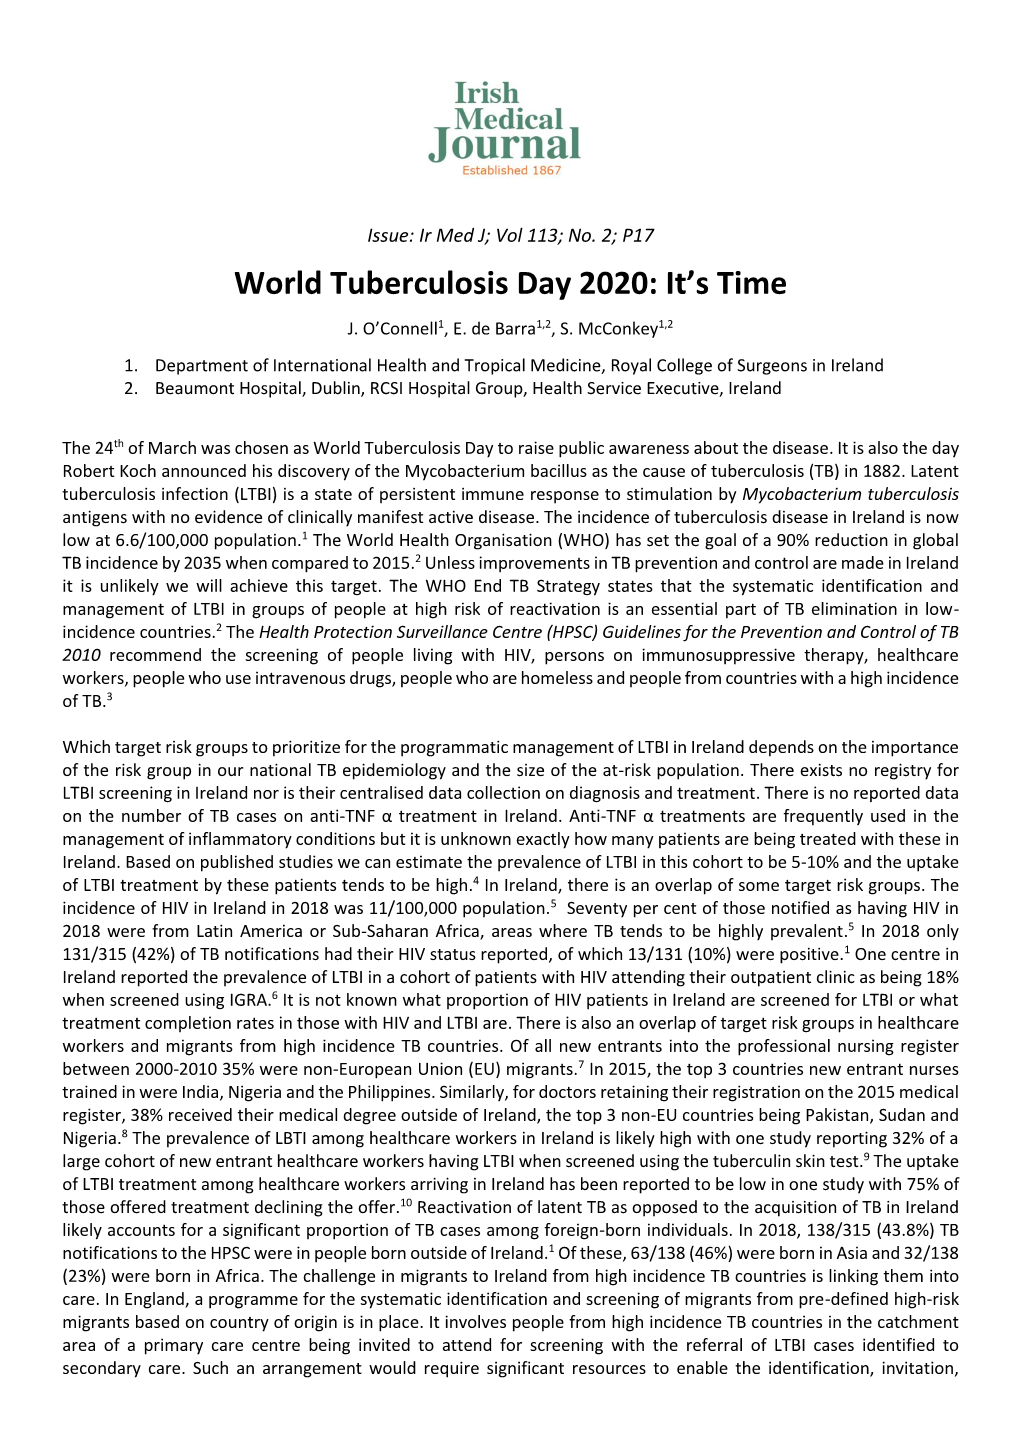 World Tuberculosis Day 2020: It's Time